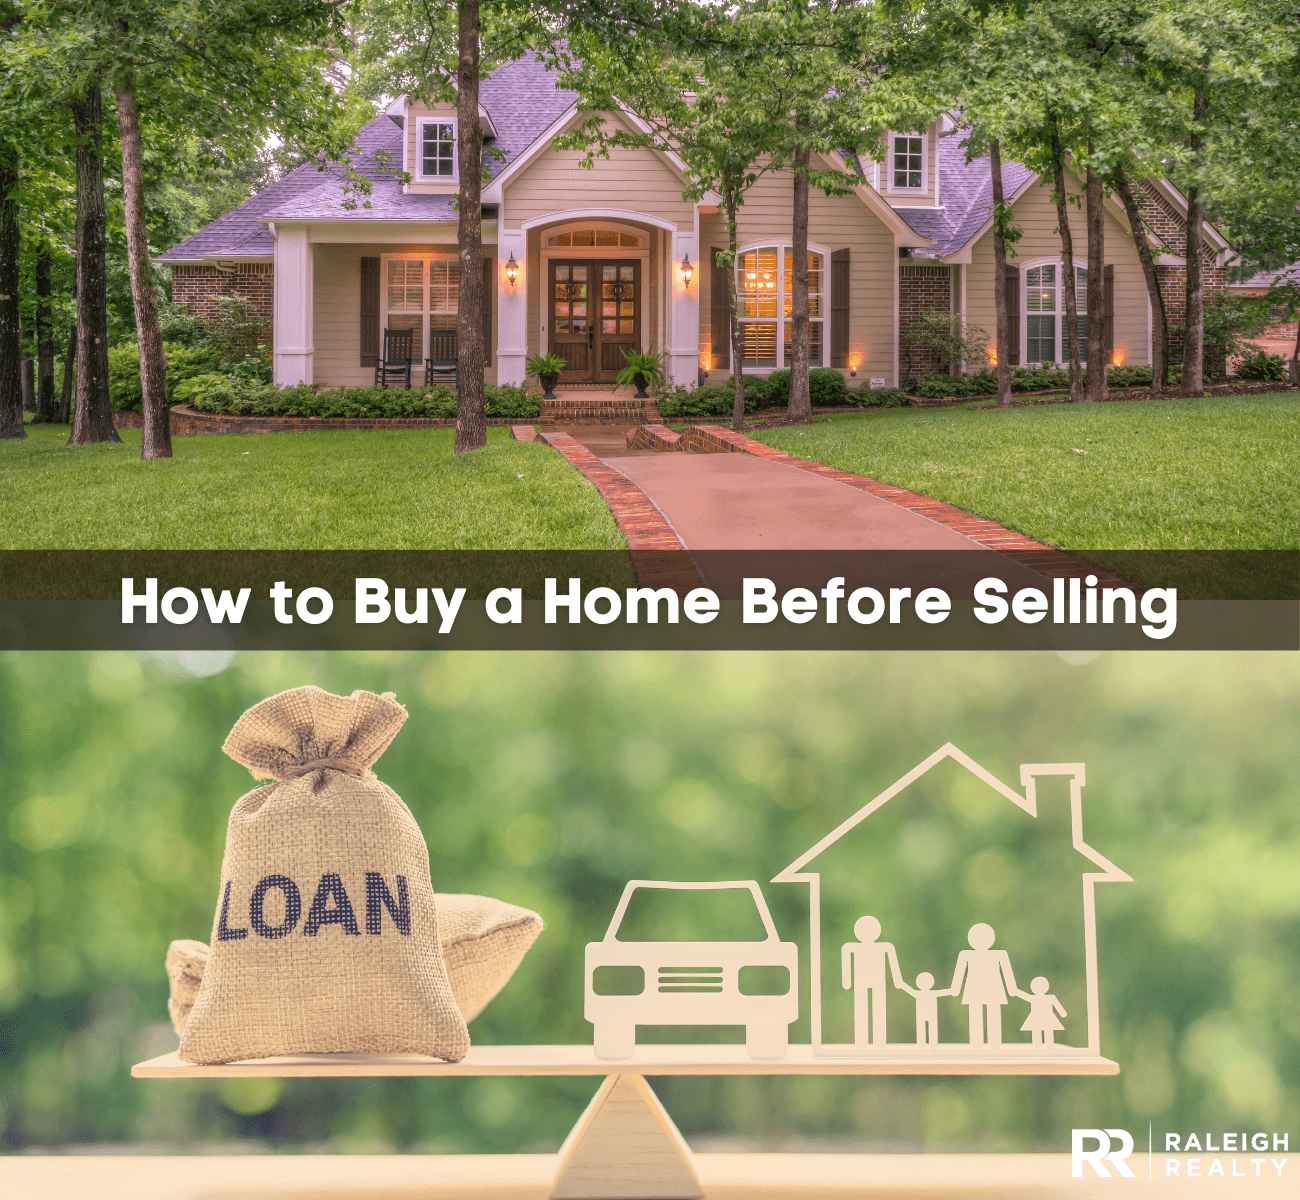 How to Buy a Home Before Selling the One You Live In